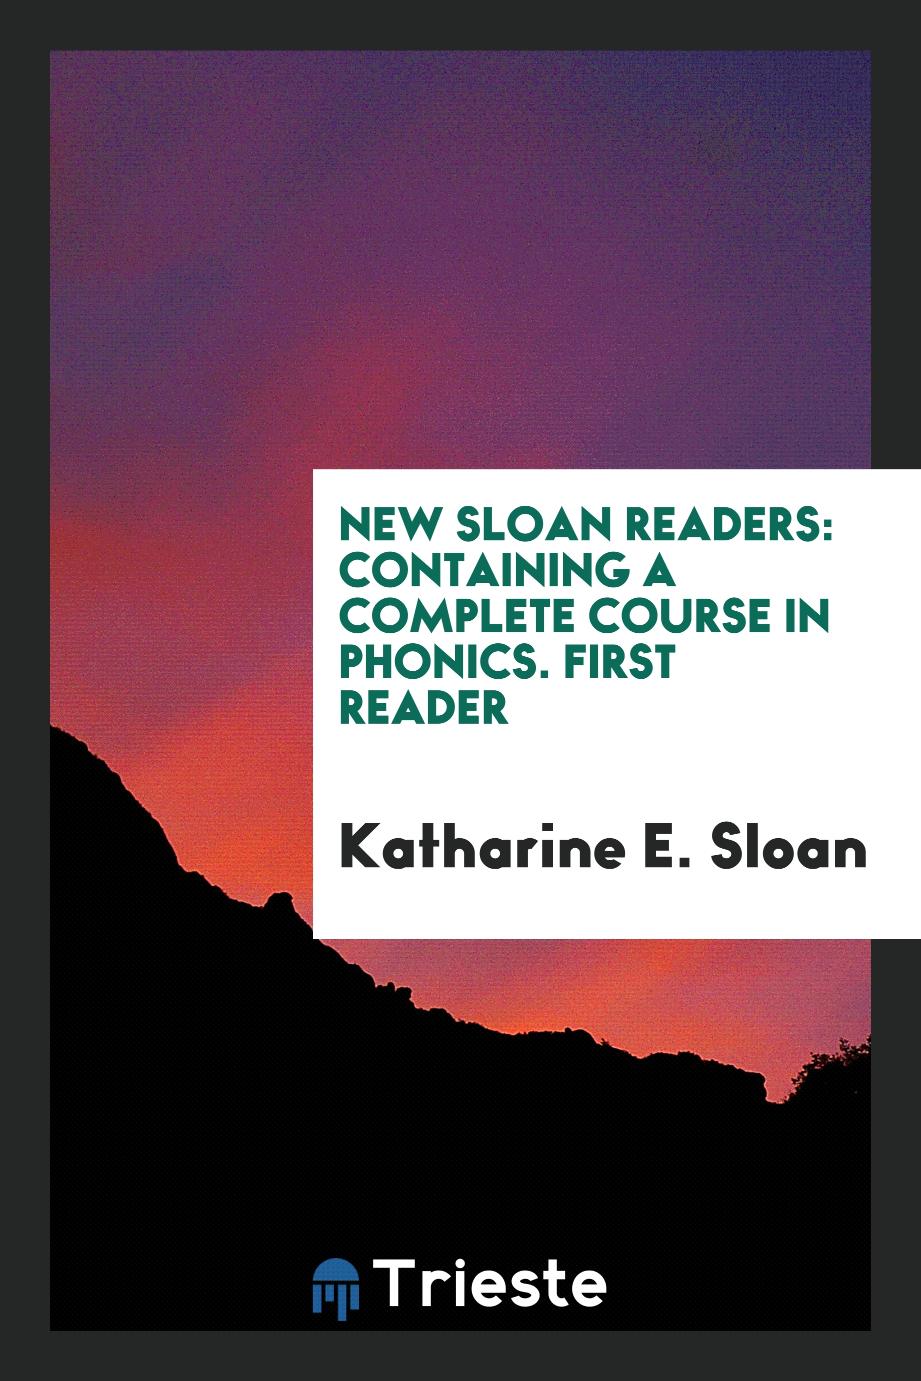 New Sloan Readers: Containing a Complete Course in Phonics. First Reader